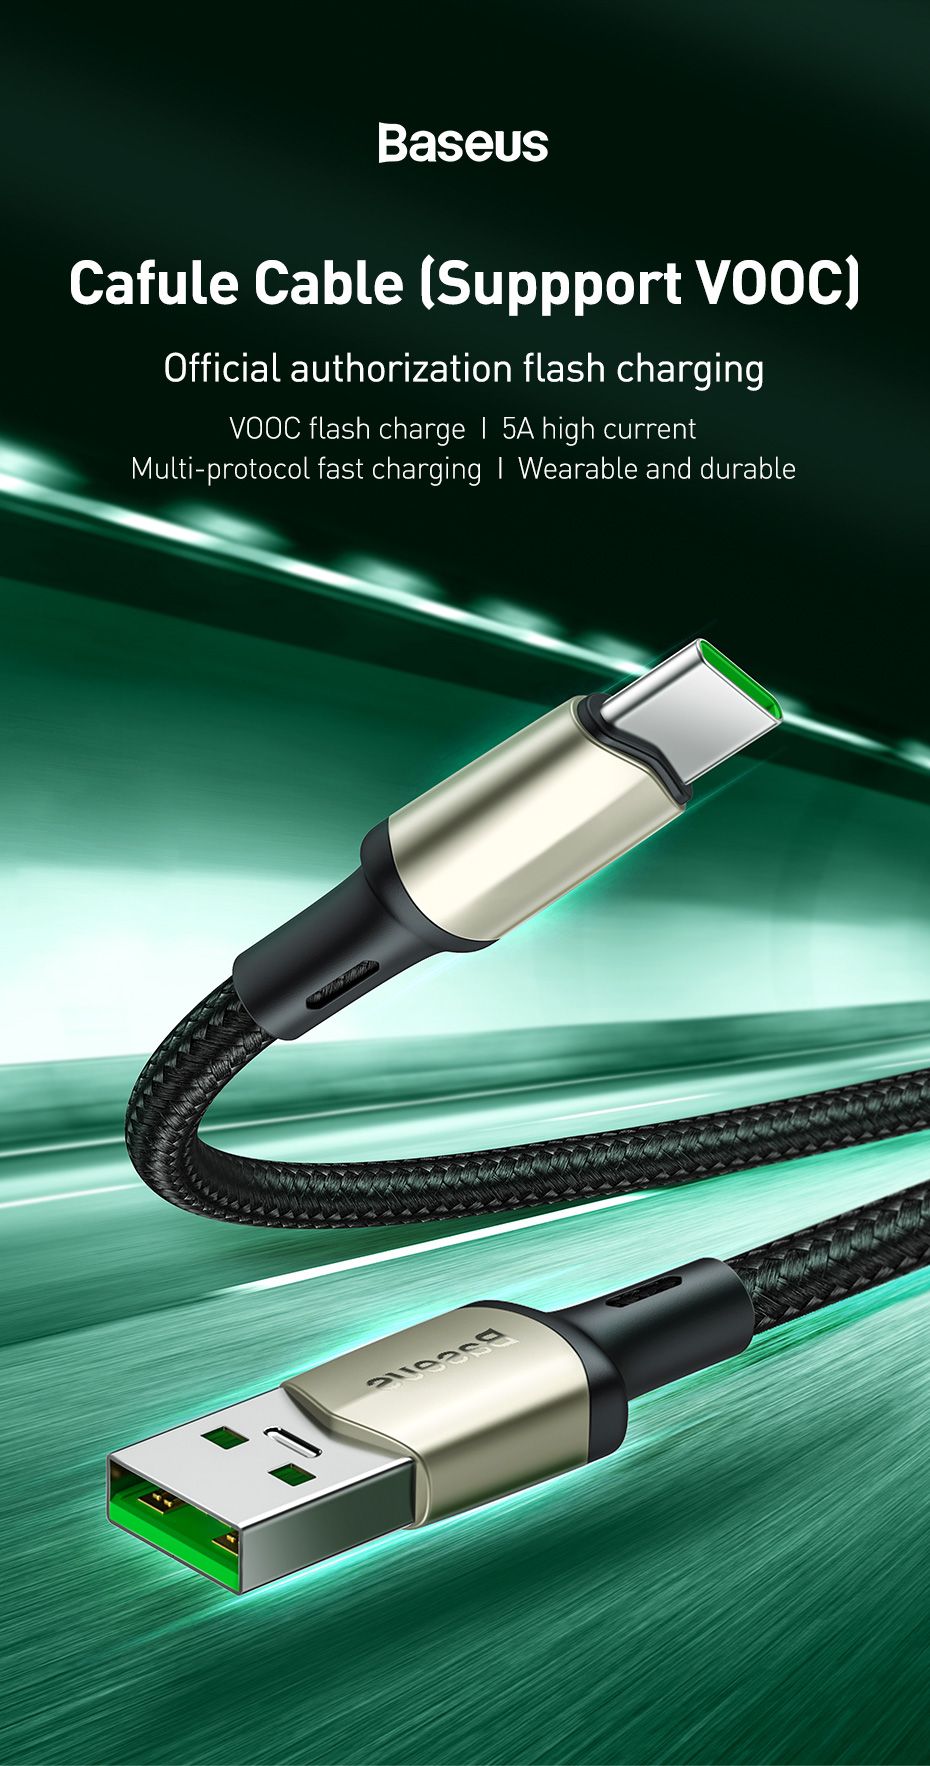 Baseus-Cafule-30W-5A-Warp-OPPO-VOOC-Certified-Flash-Charge-USB-Type-C-Cable-QC30-SCP-AFC-FCP-Fast-Ch-1706413